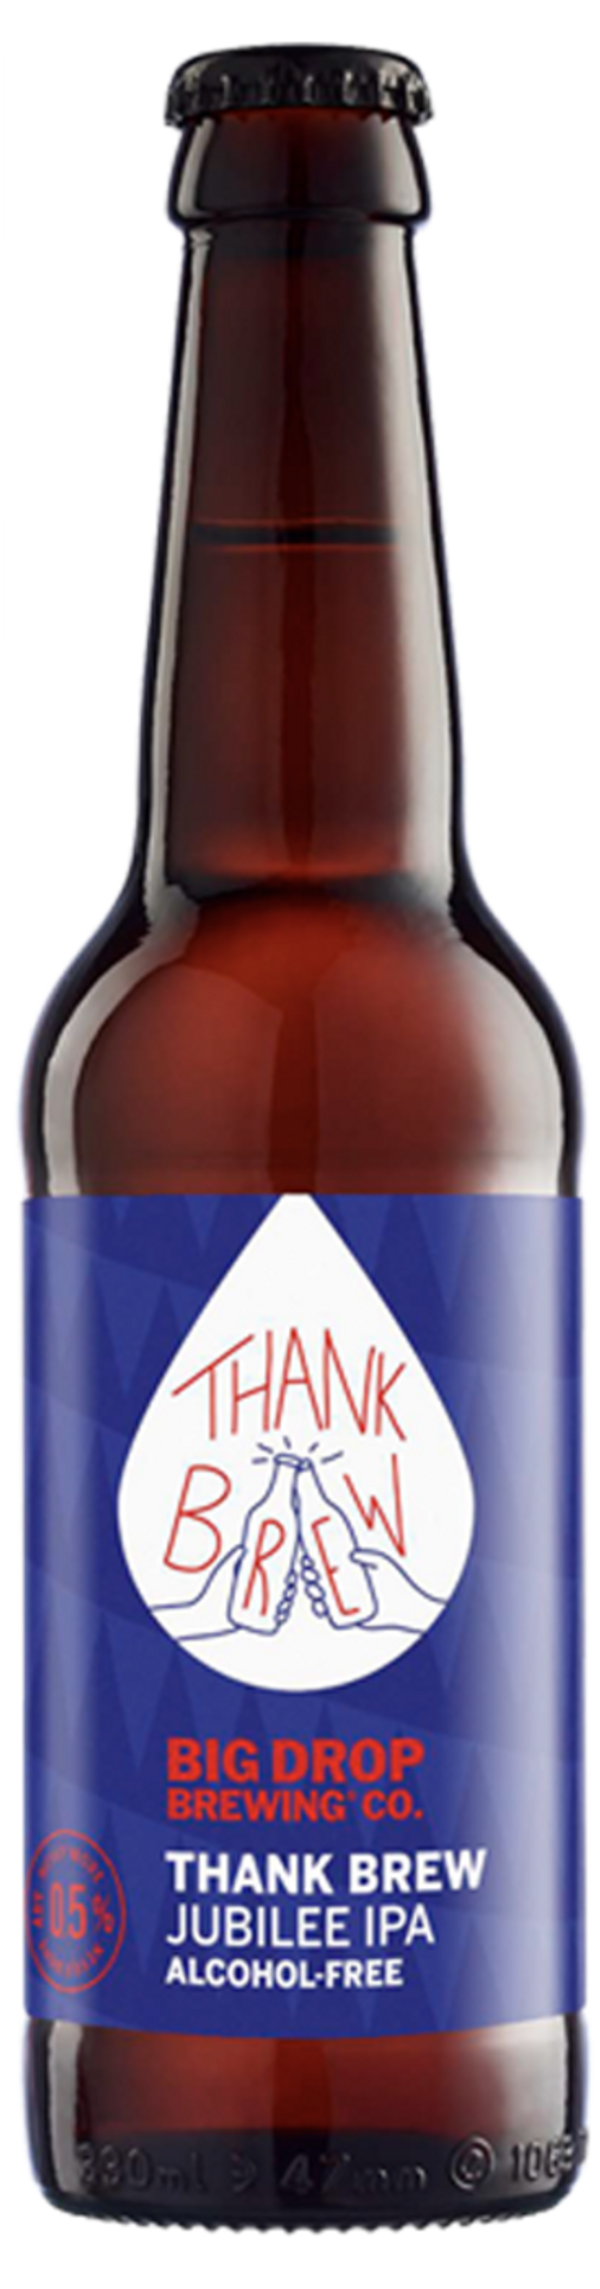 A pack image of Big Drop's Thank Brew Jubilee IPA